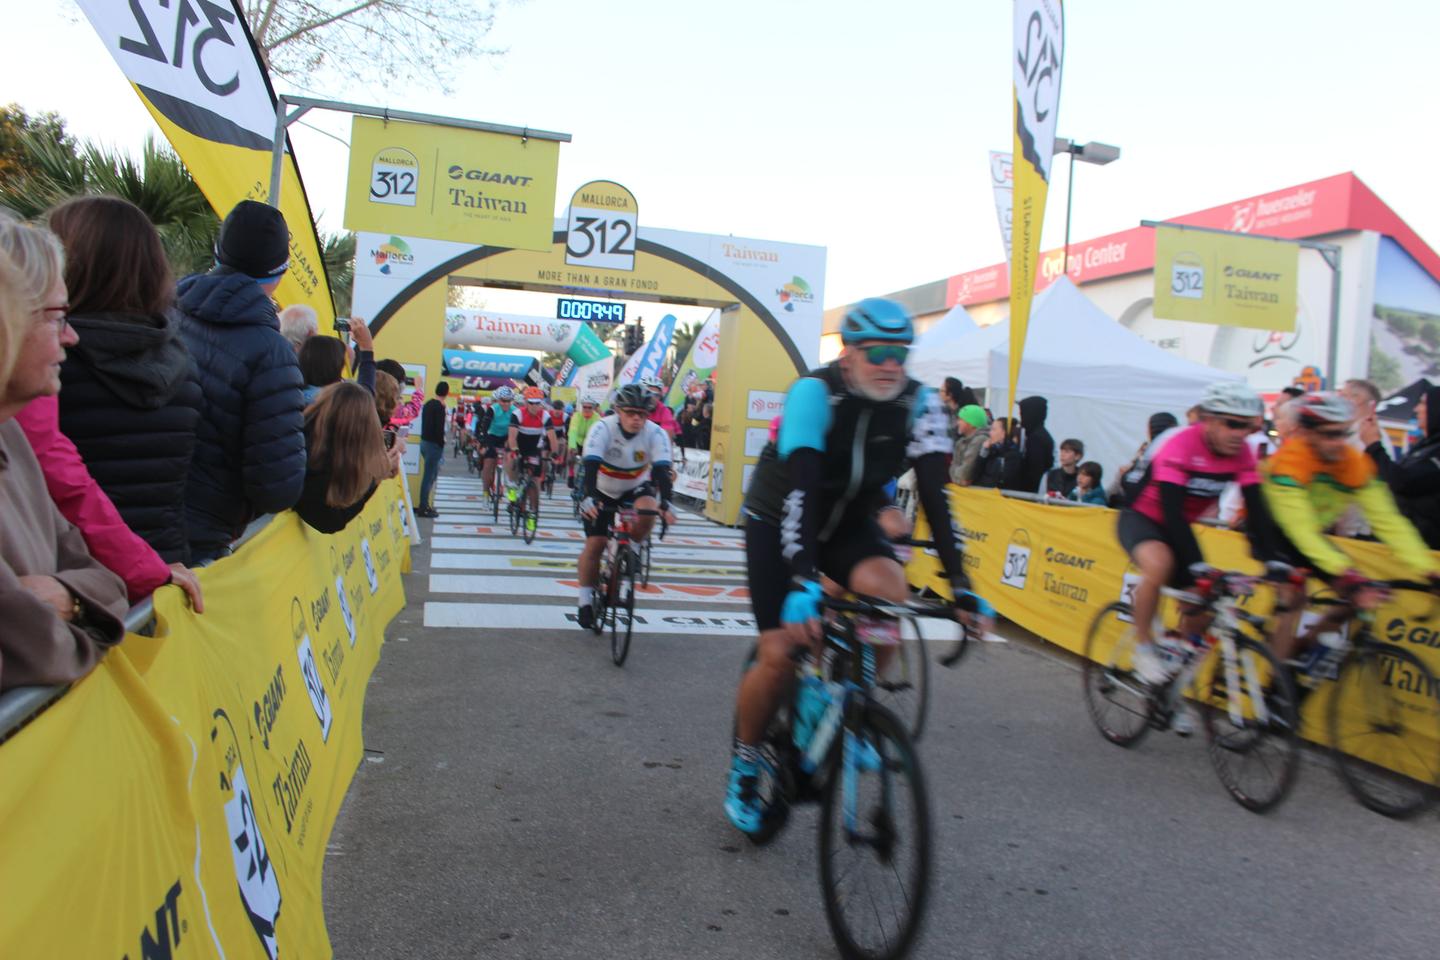 Cyclists in motion at the beginning of the Mallorca 312 race.